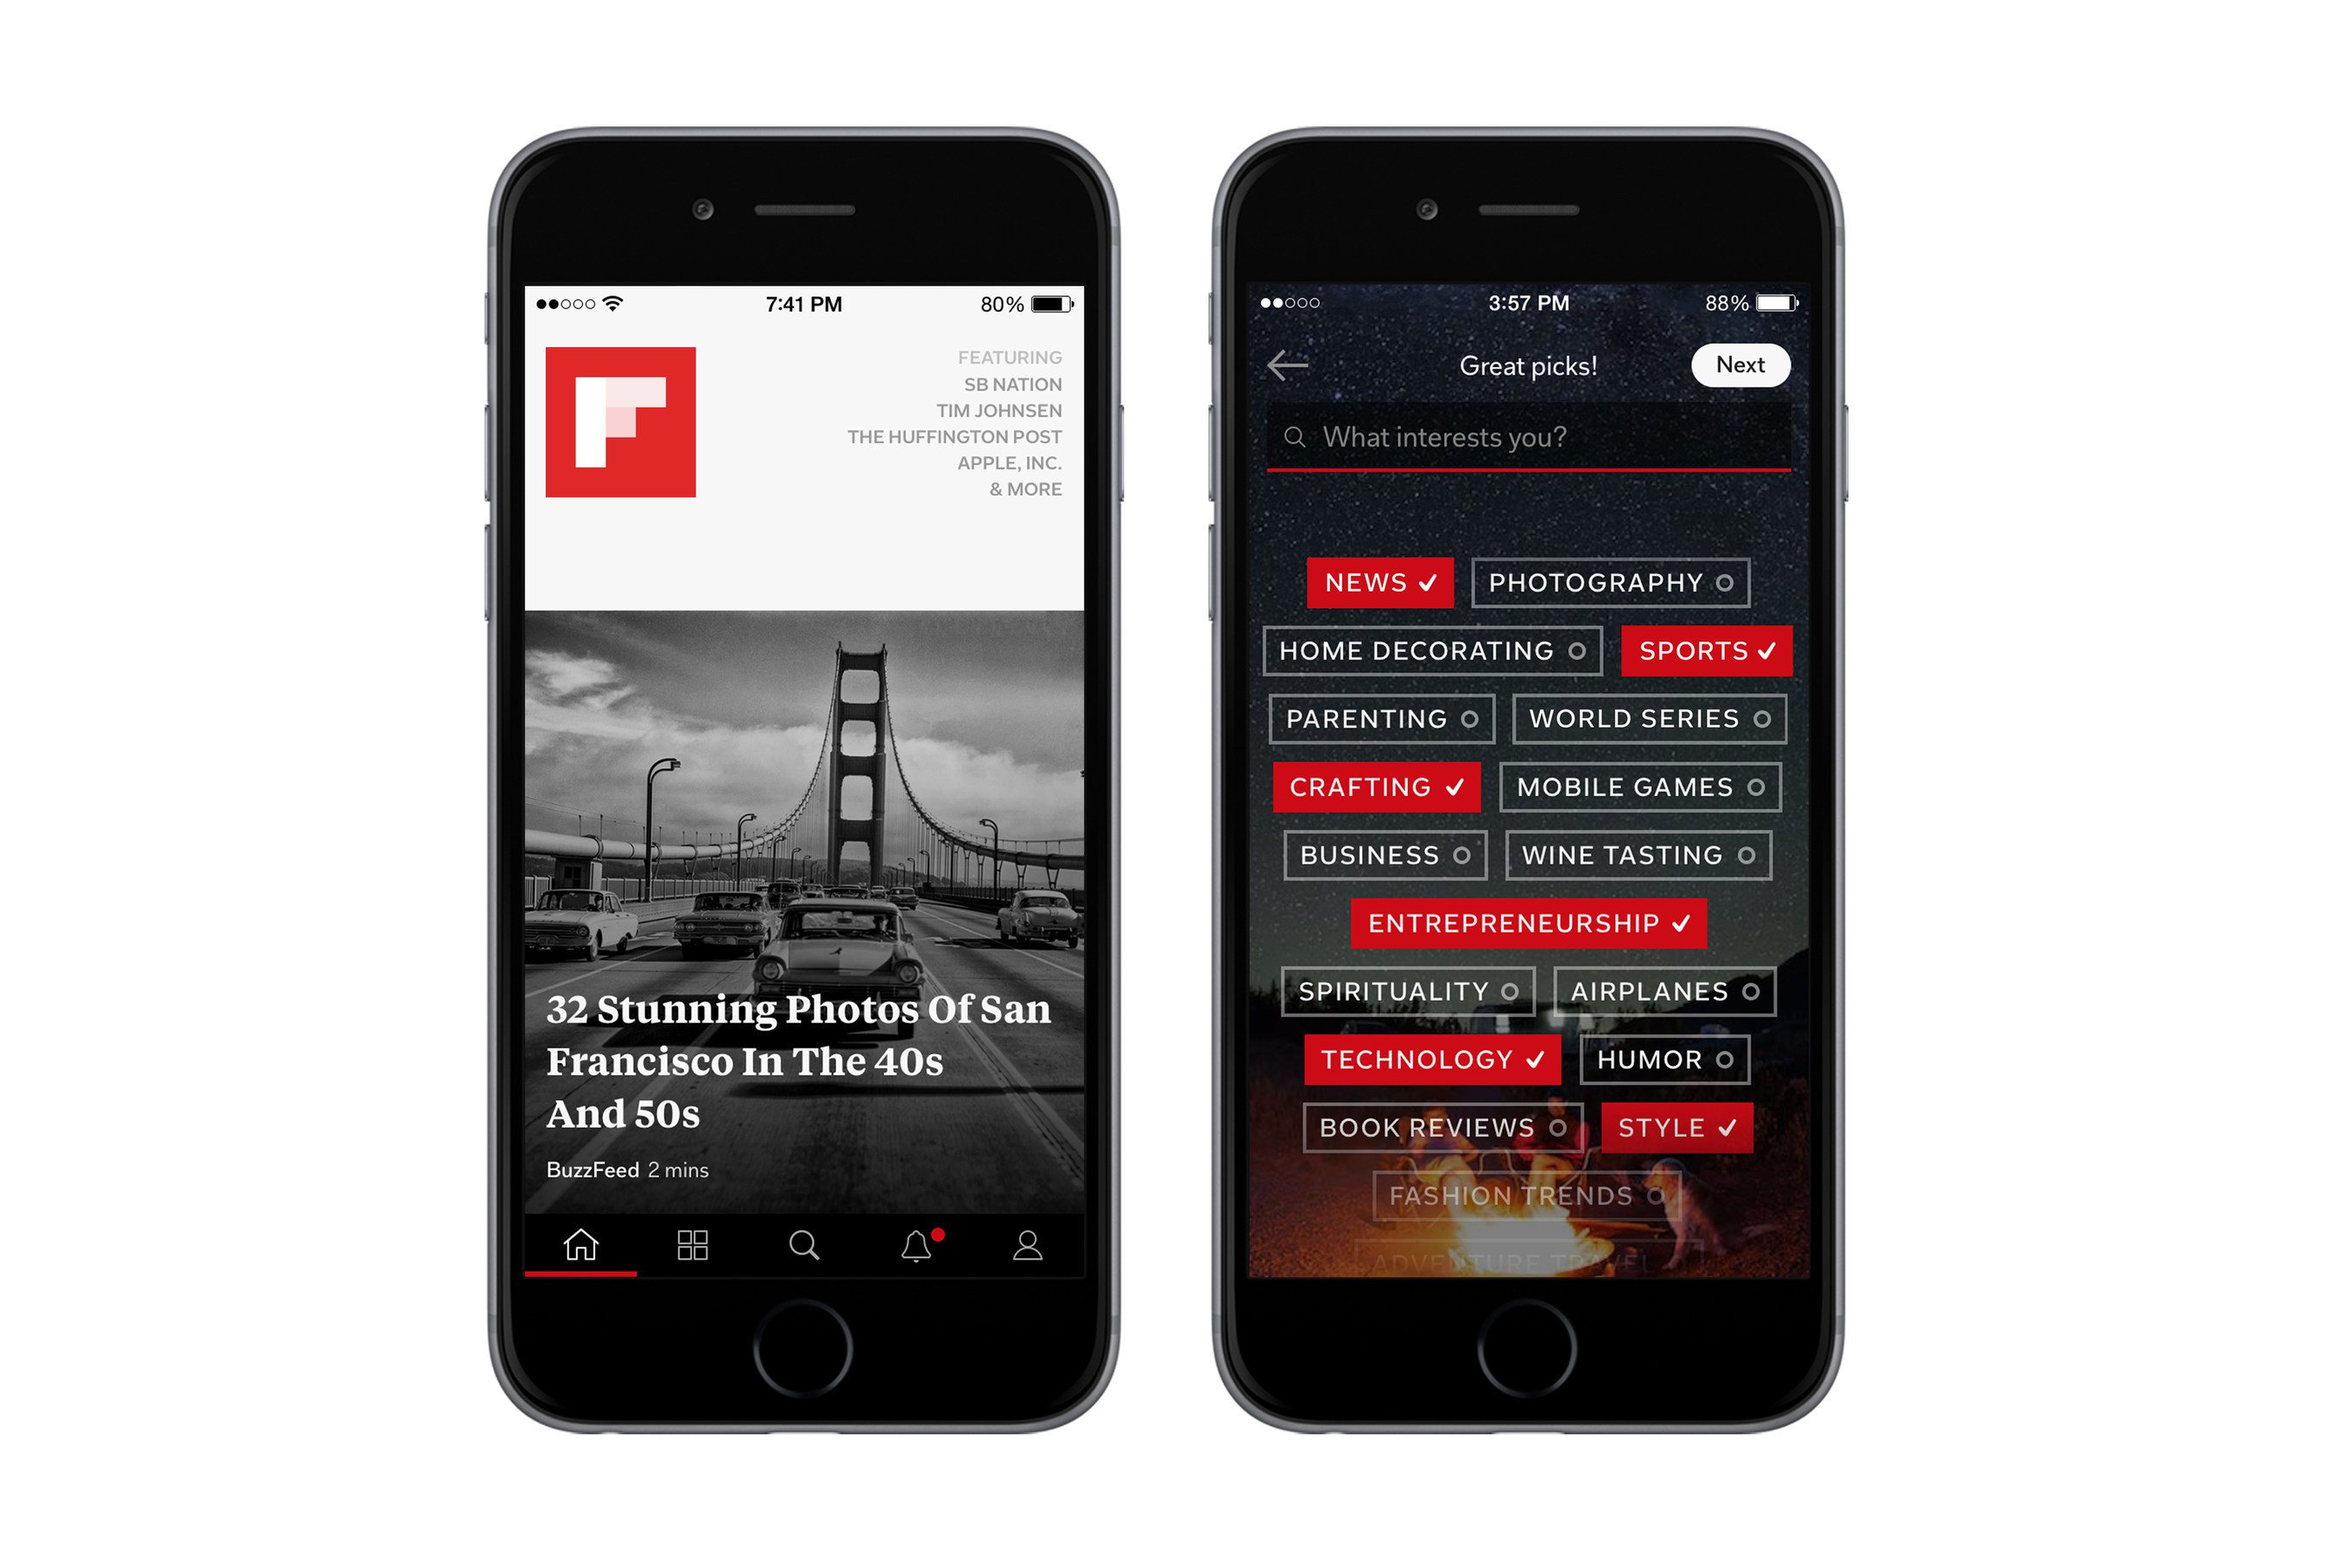 Now with 34,000 topics, Flipboard gives readers an even more personal magazine.